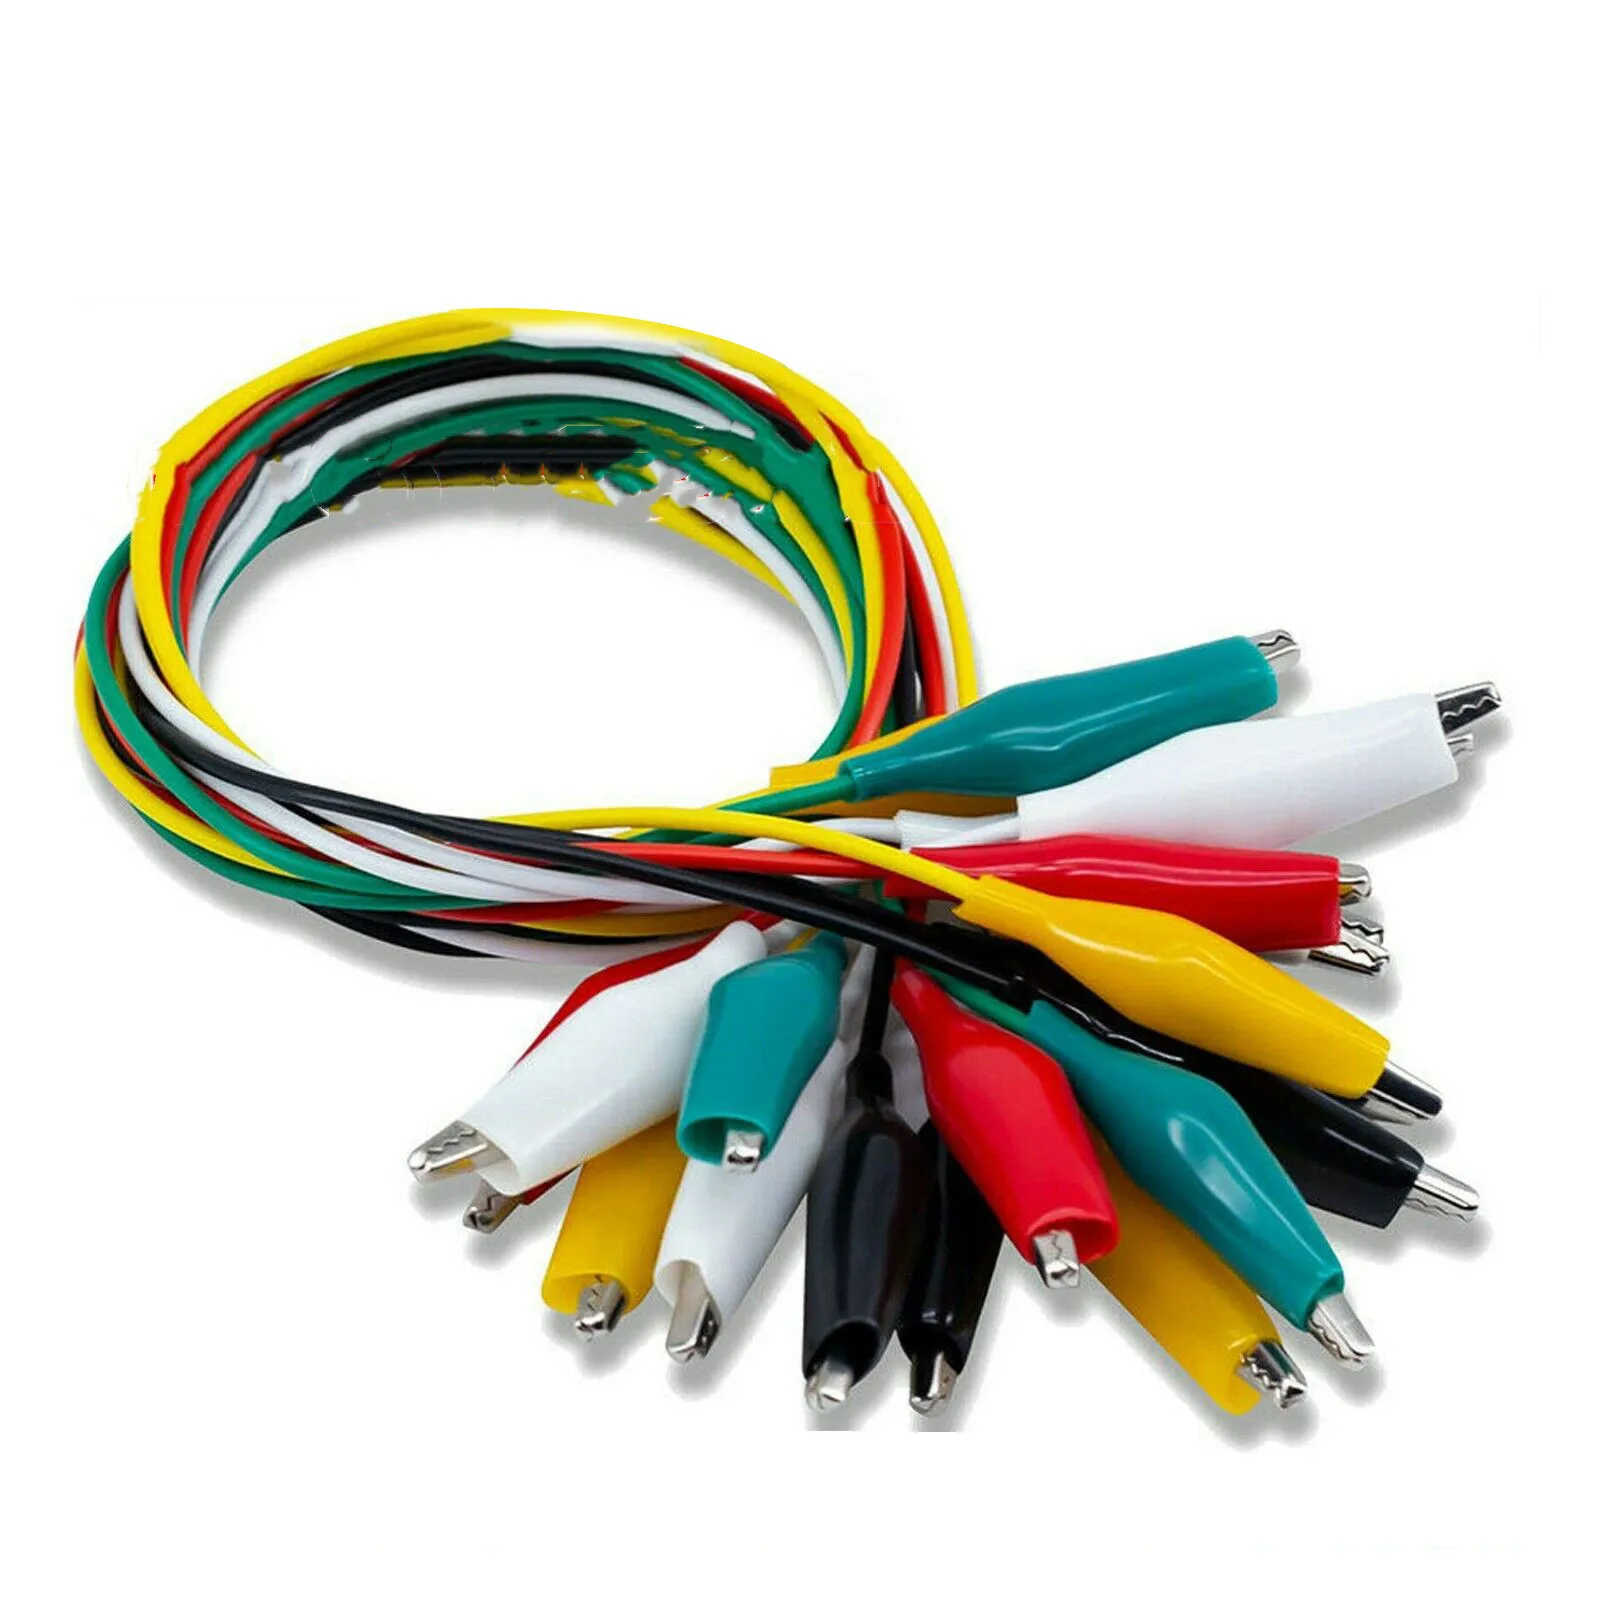 

10 Pcs Electrical Alligator Clips With Wires Test Leads Sets And Stamping Jumper Wires For Circuit Connection/Experiment